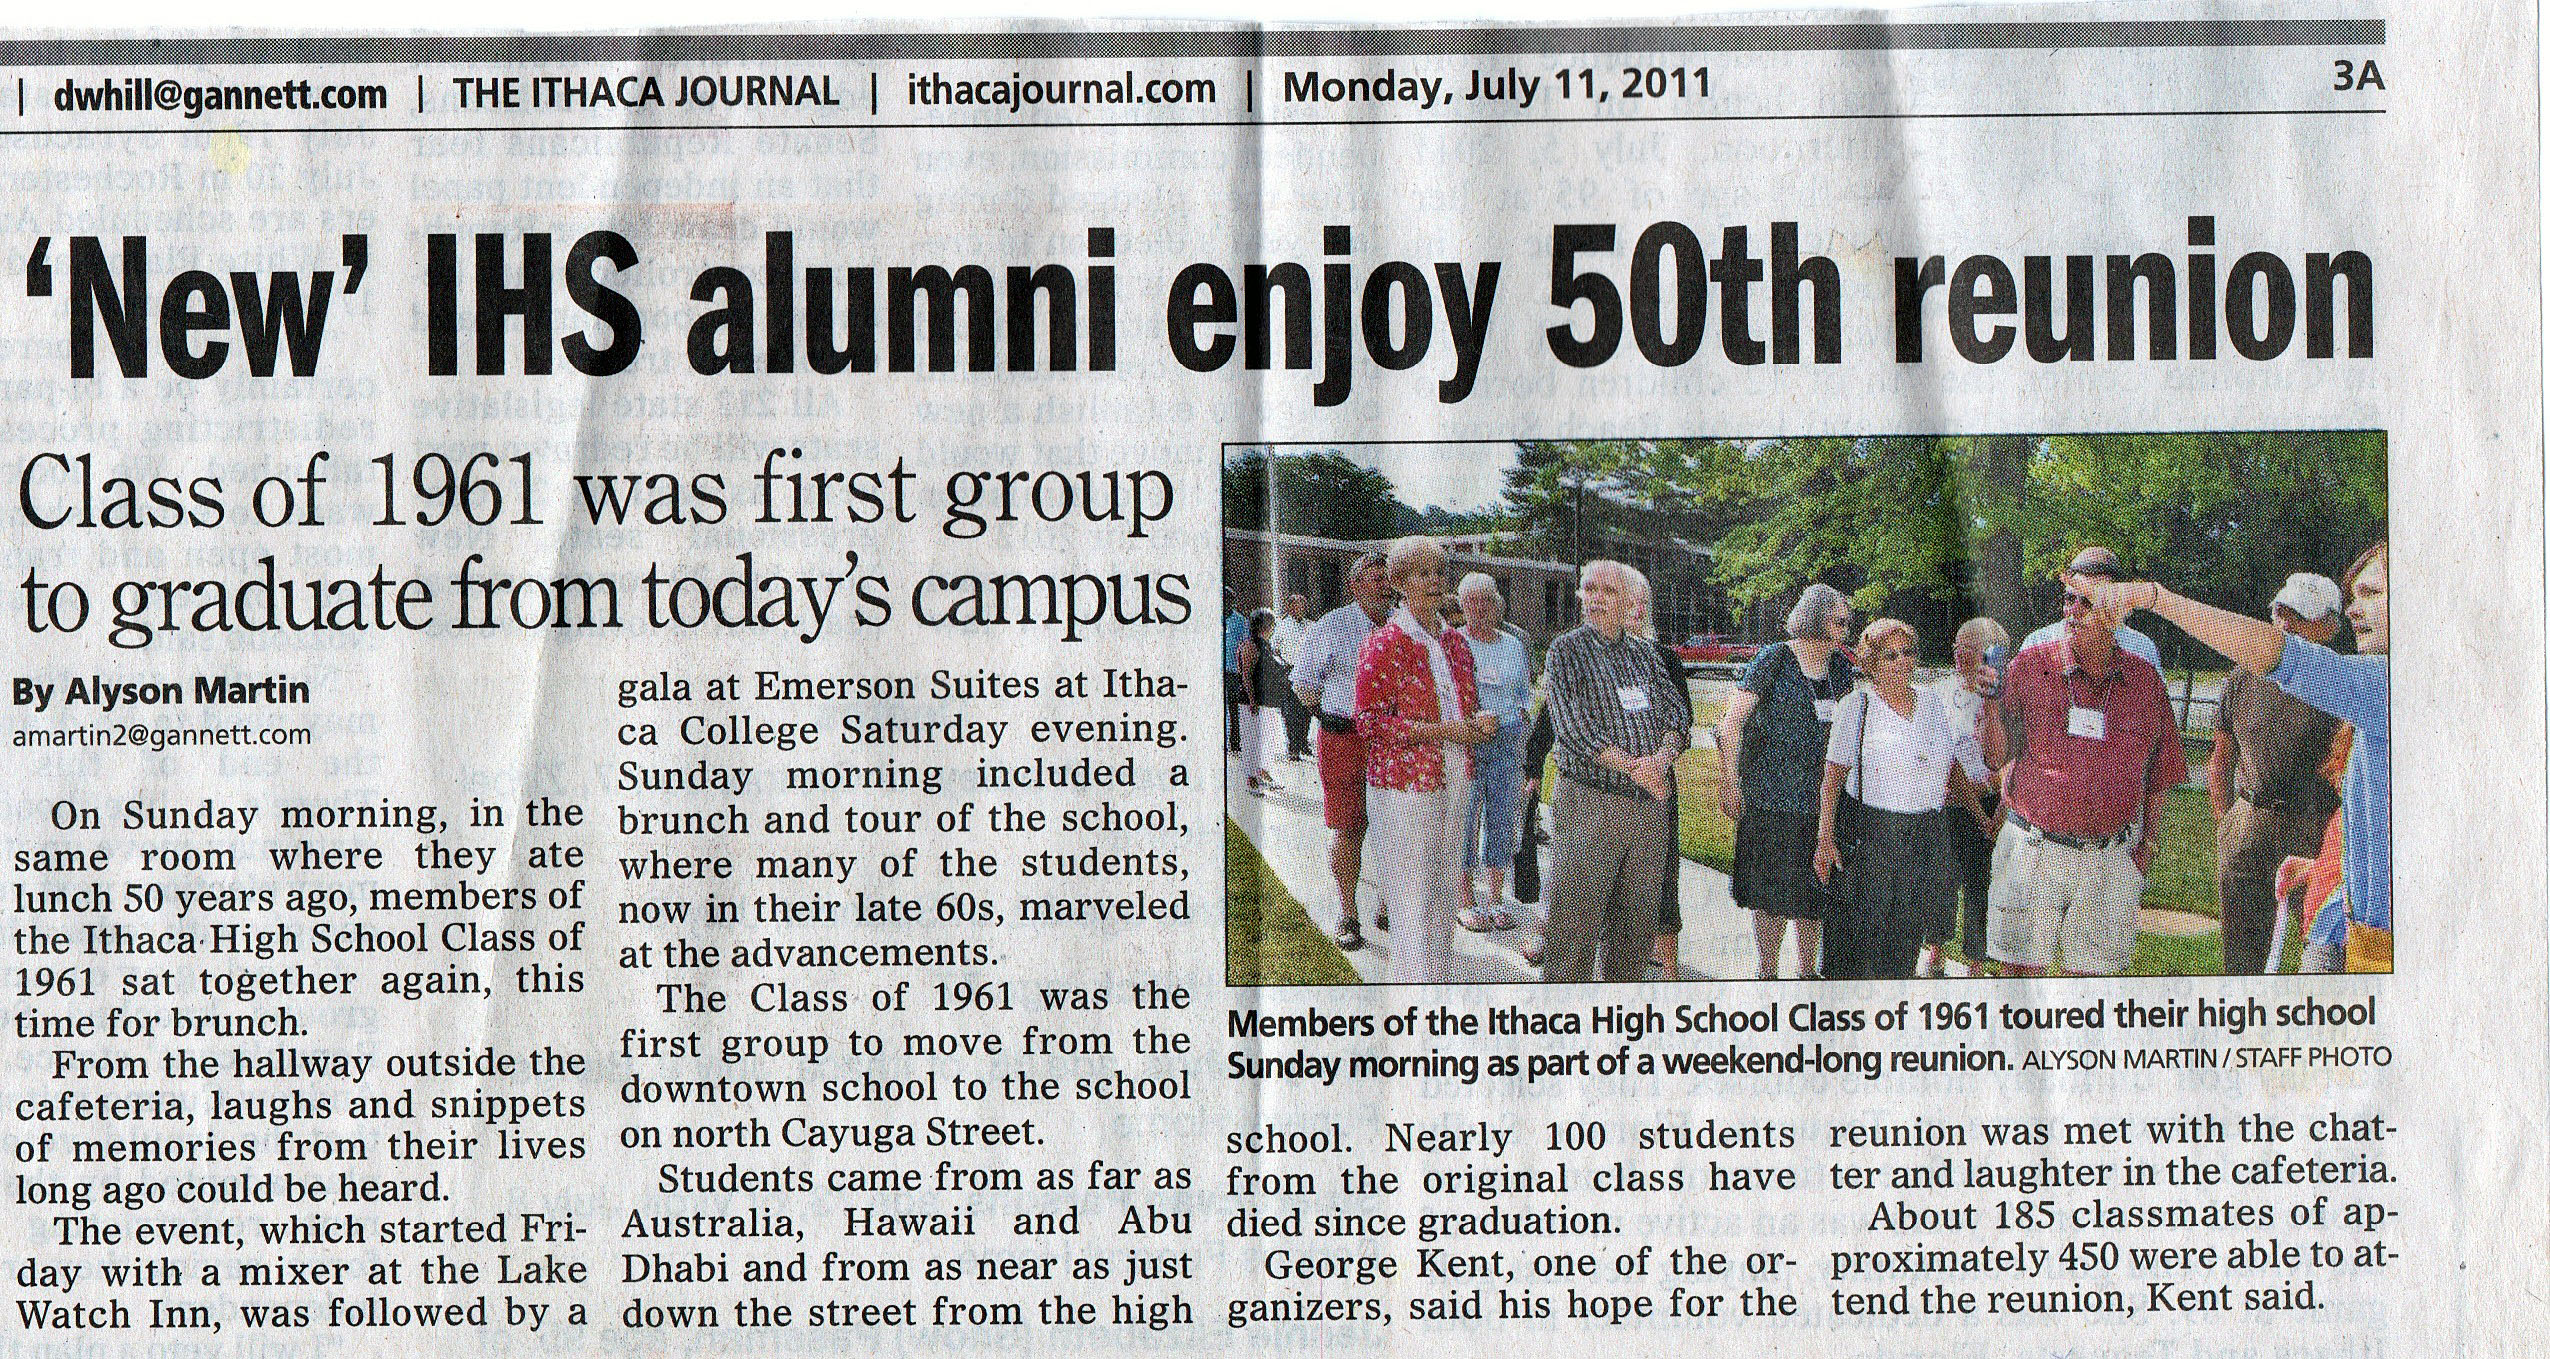 Ithaca Journal Article On IHS Class of 1961 50th Reunion